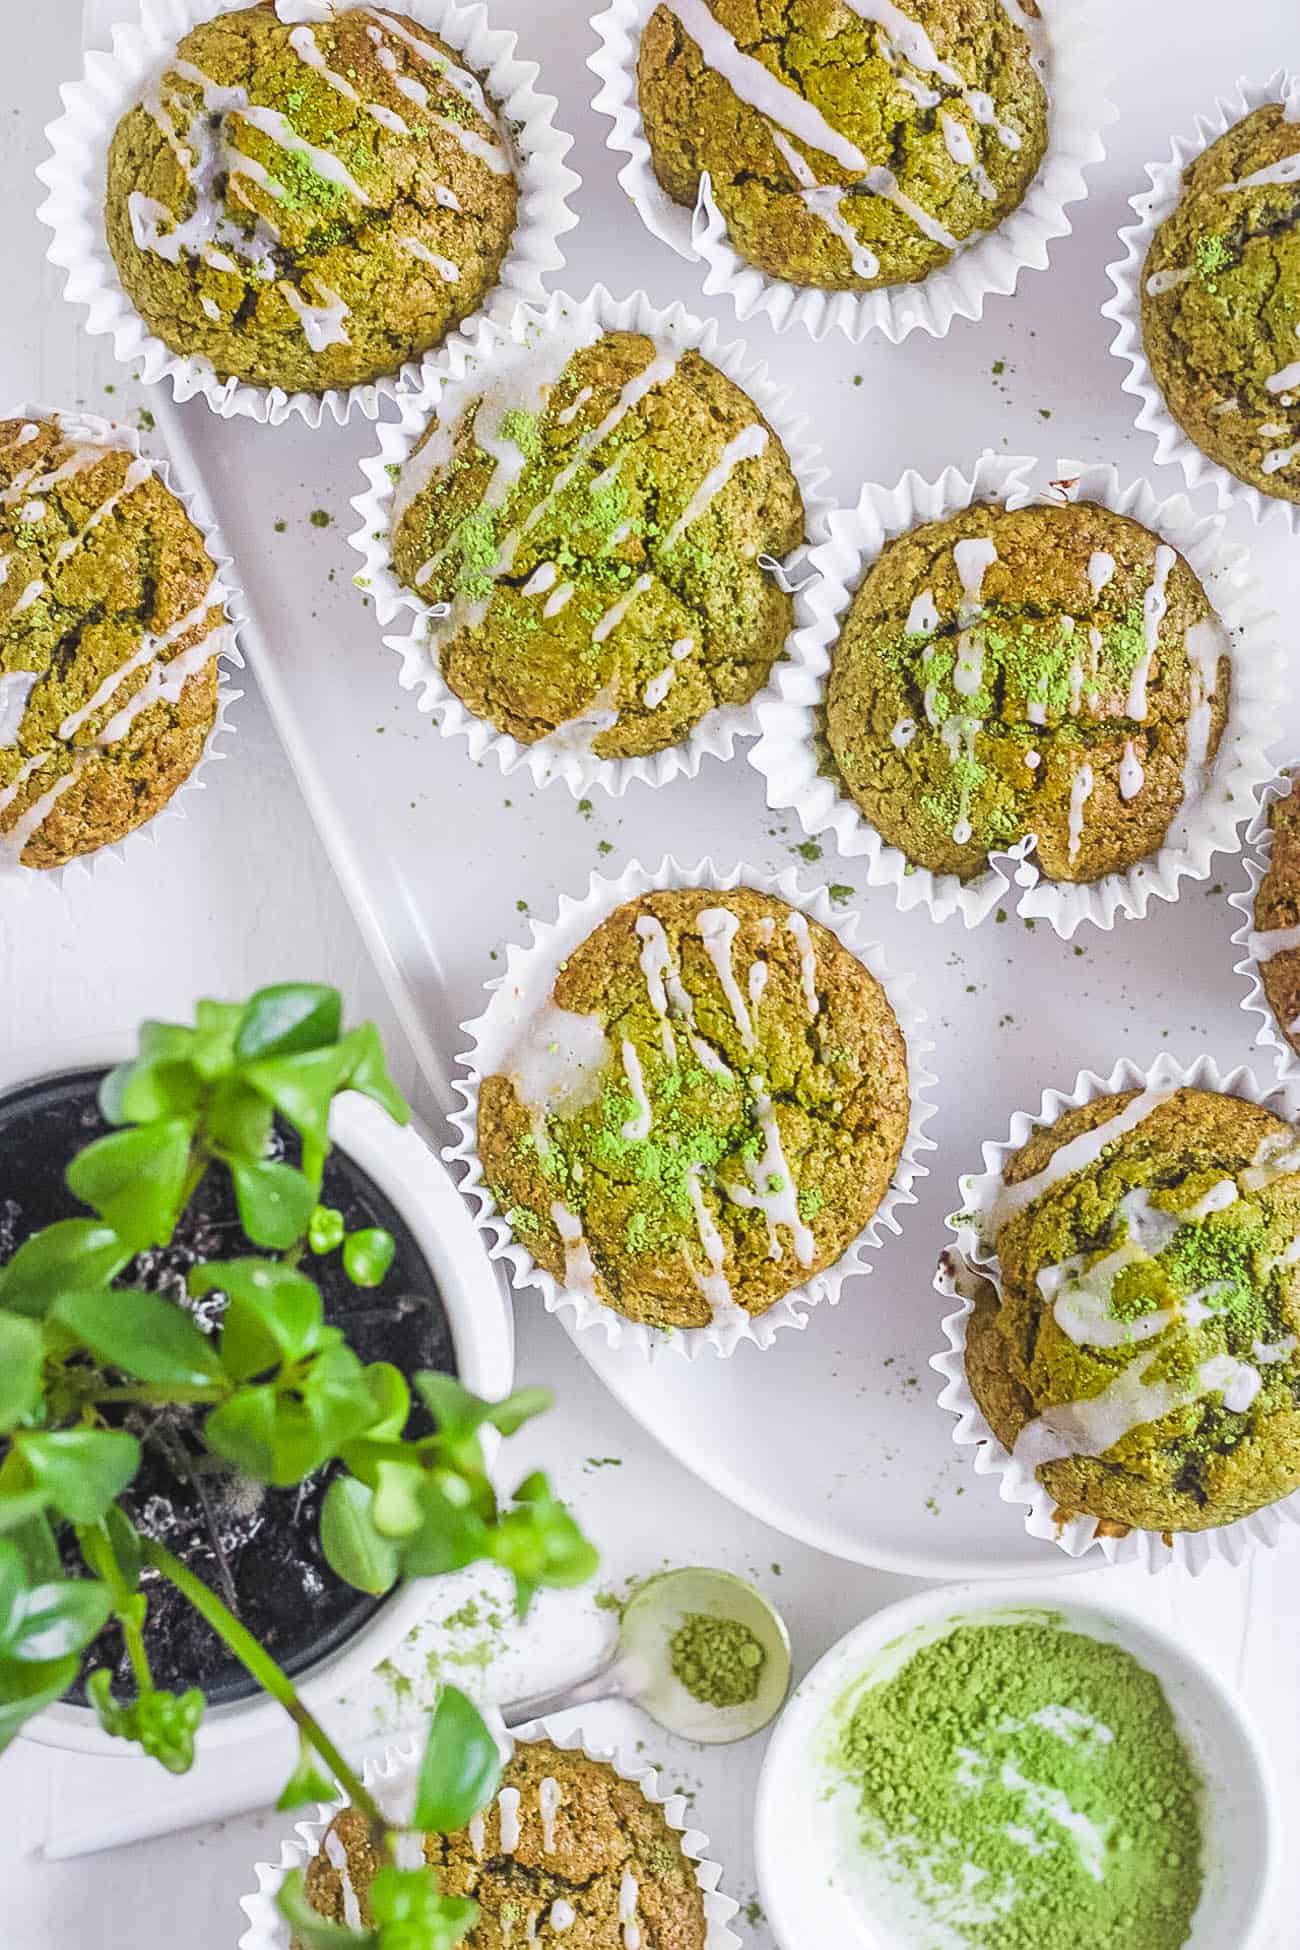 easy healthy matcha muffins recipe on a white plate with lemon frosting - plant based breakfast ideas